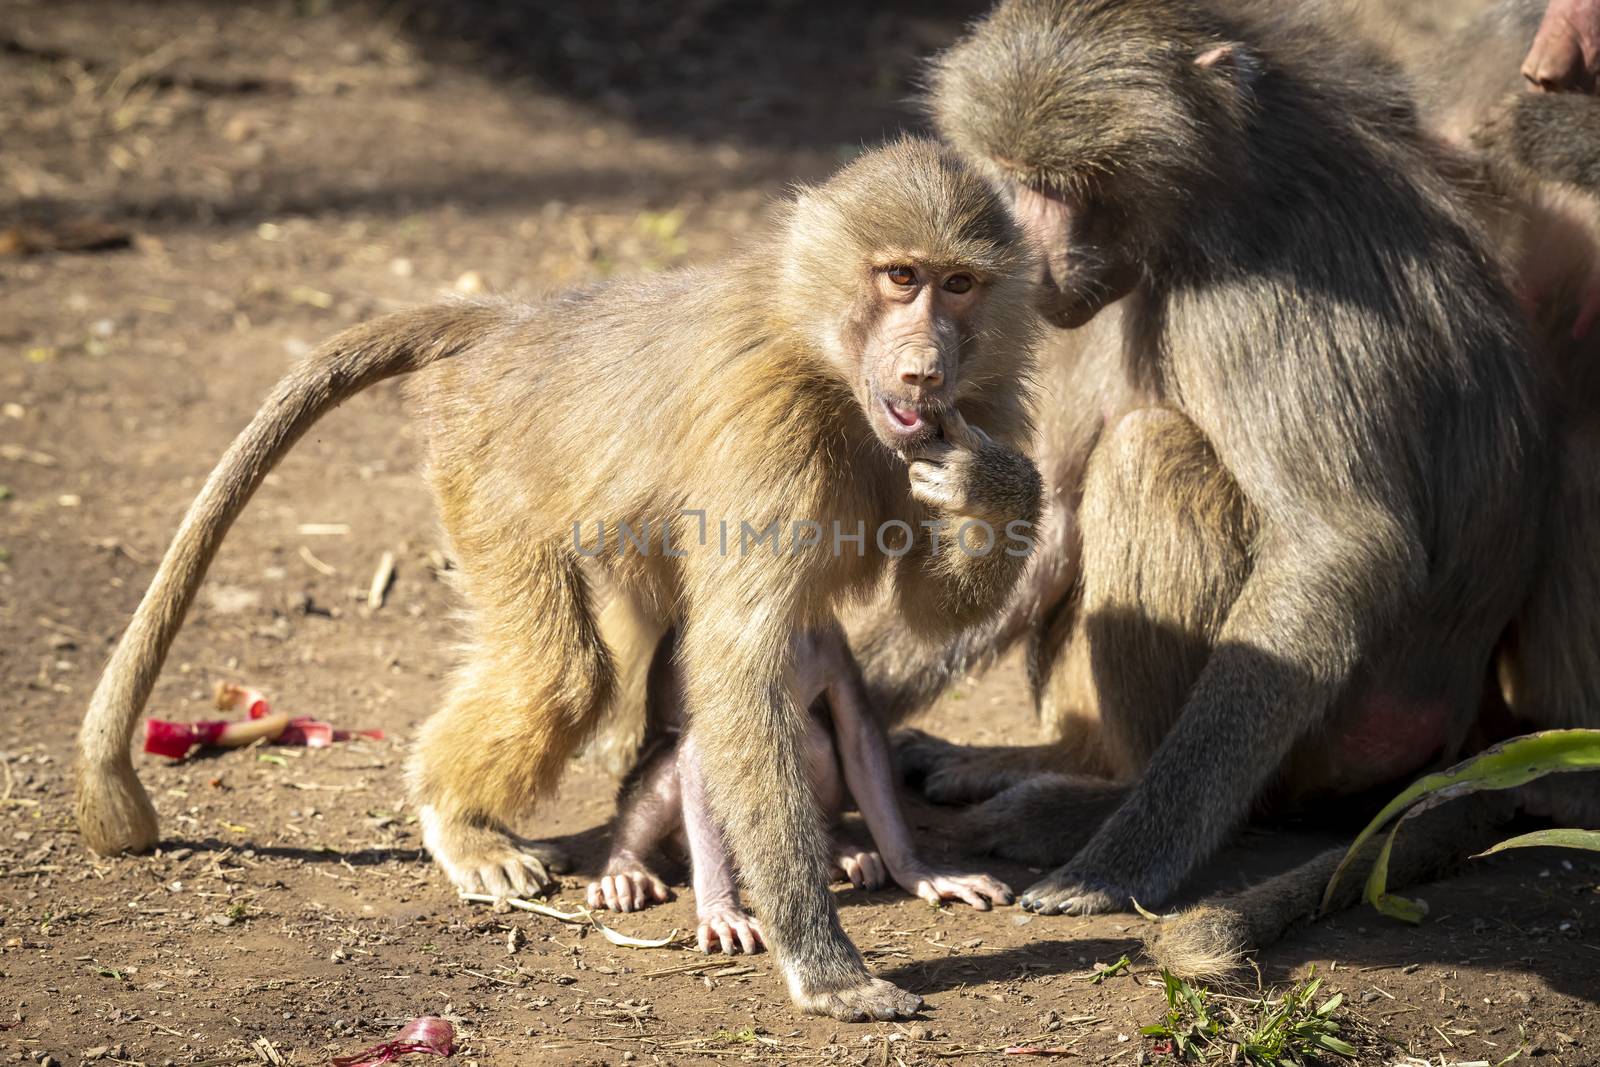 Adolescent Hamadryas Baboons preening each other by WittkePhotos